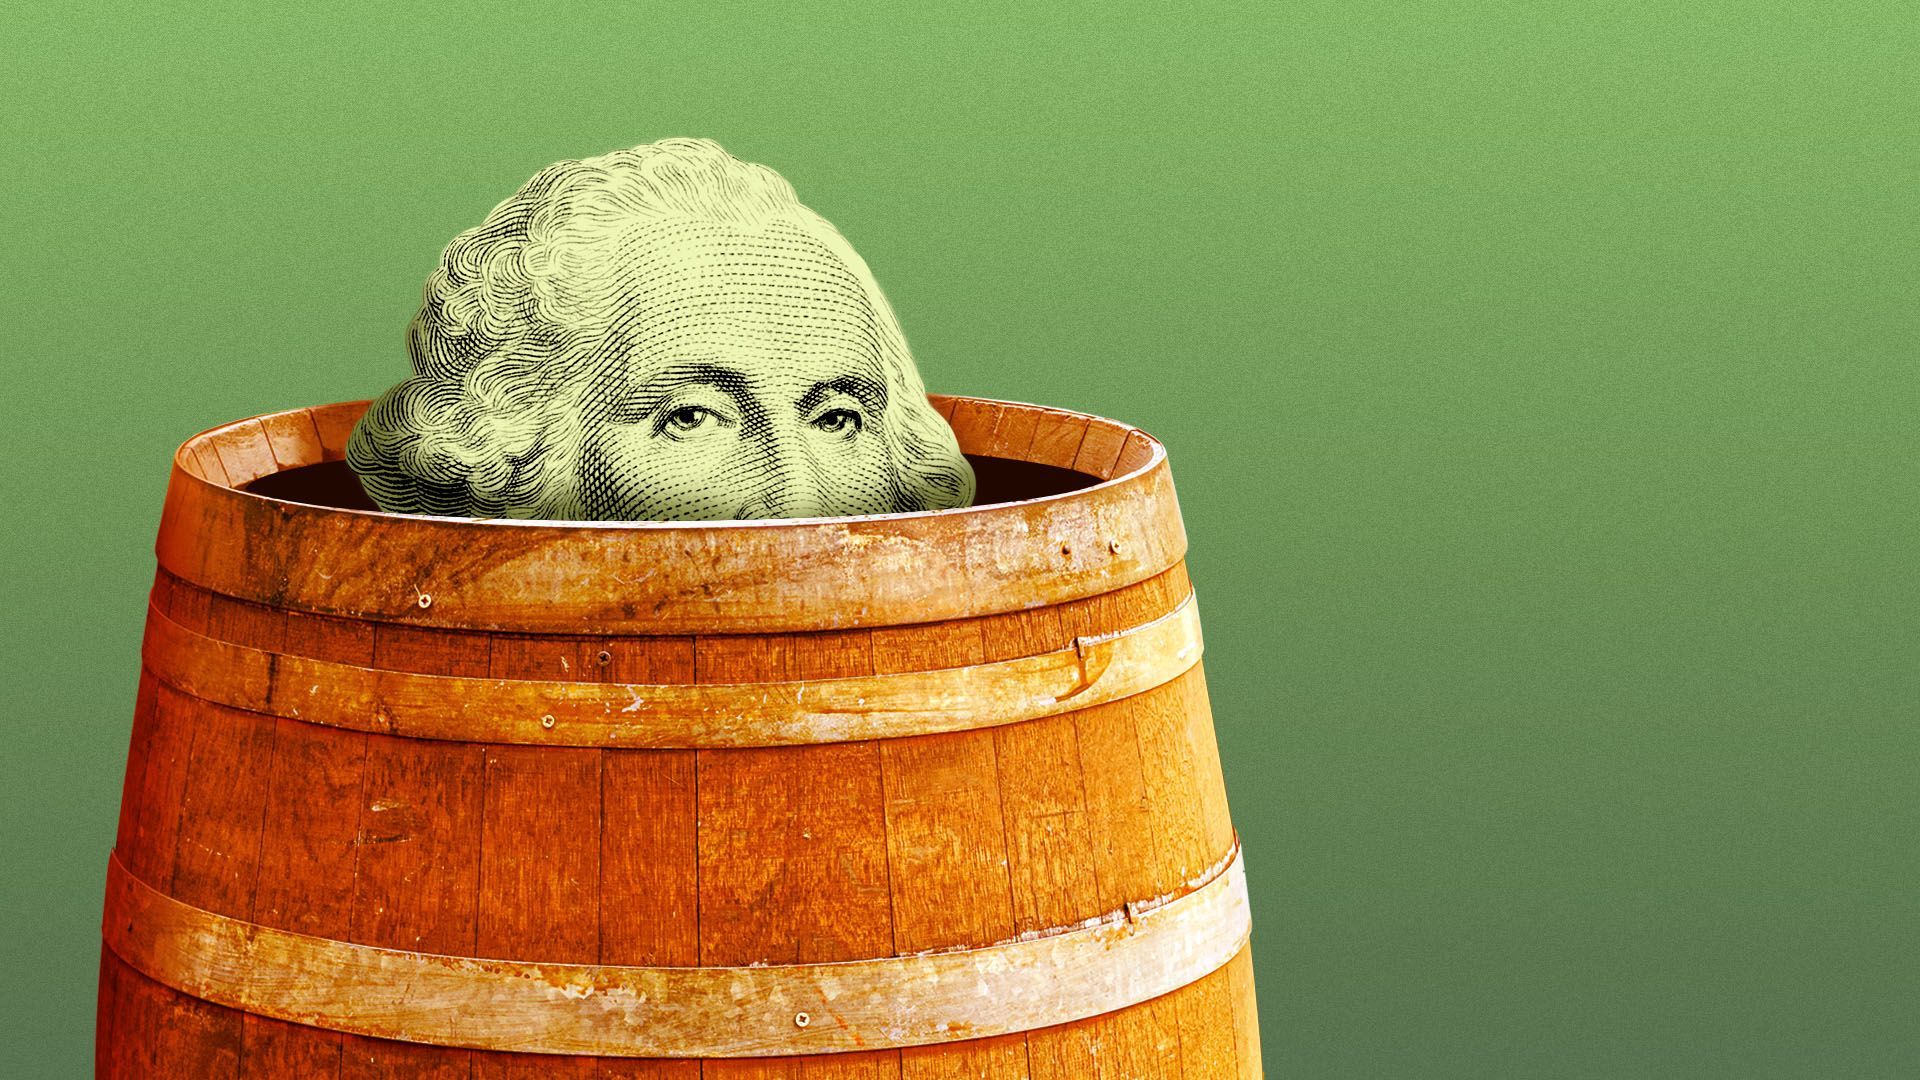 Illustration of George Washington from a one dollar bill peeking out of a barrel